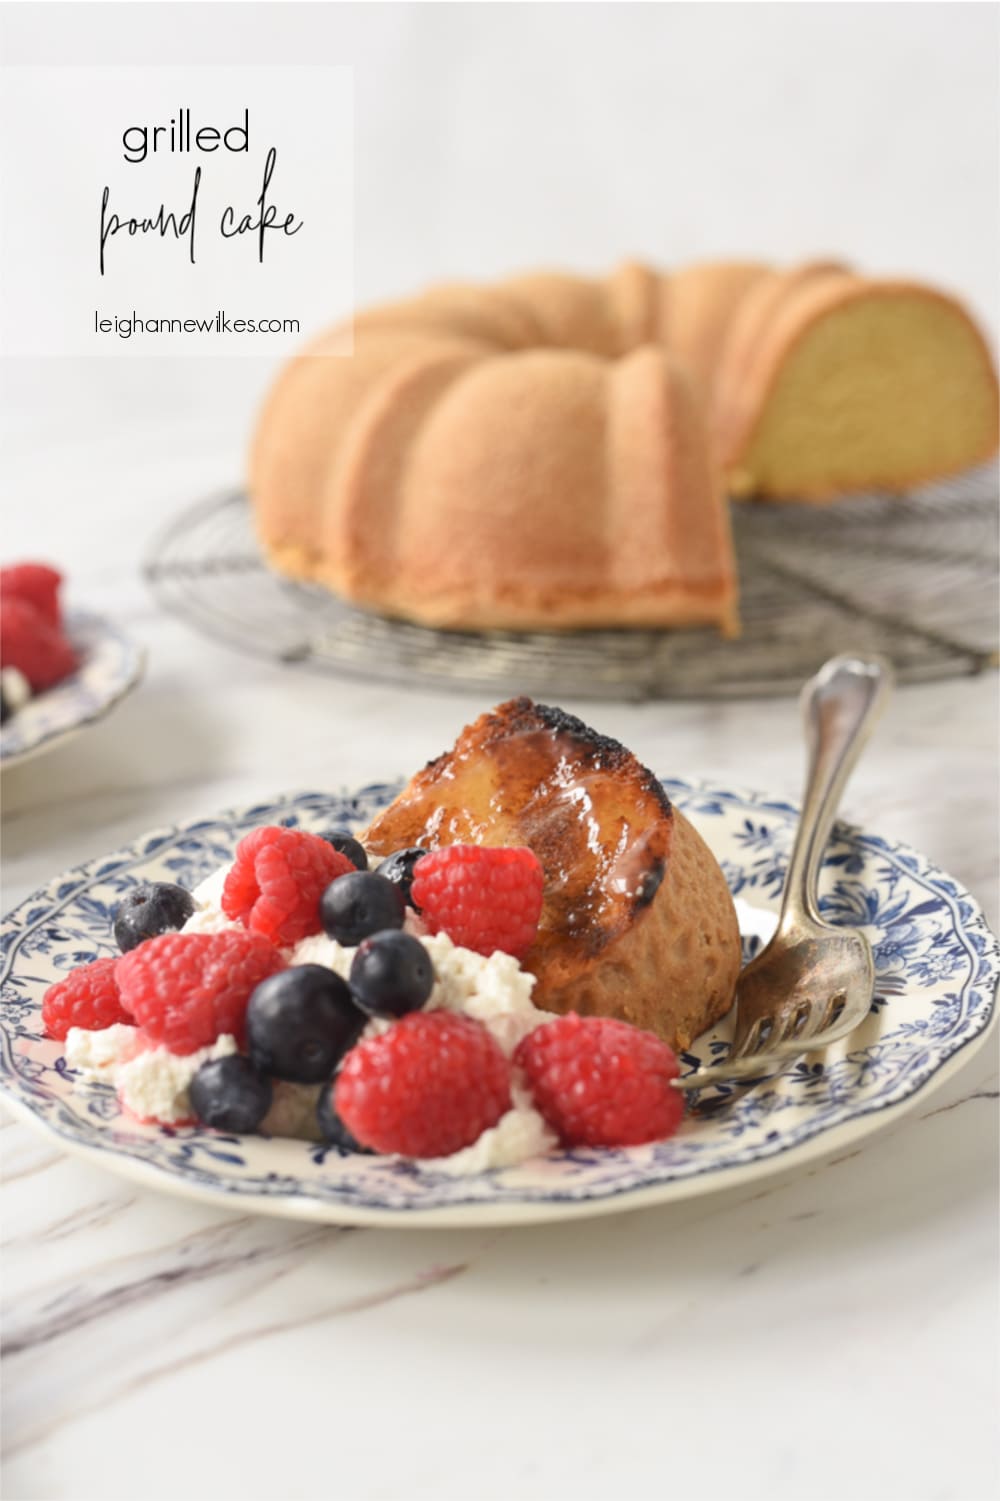 grilled pound cake with berries